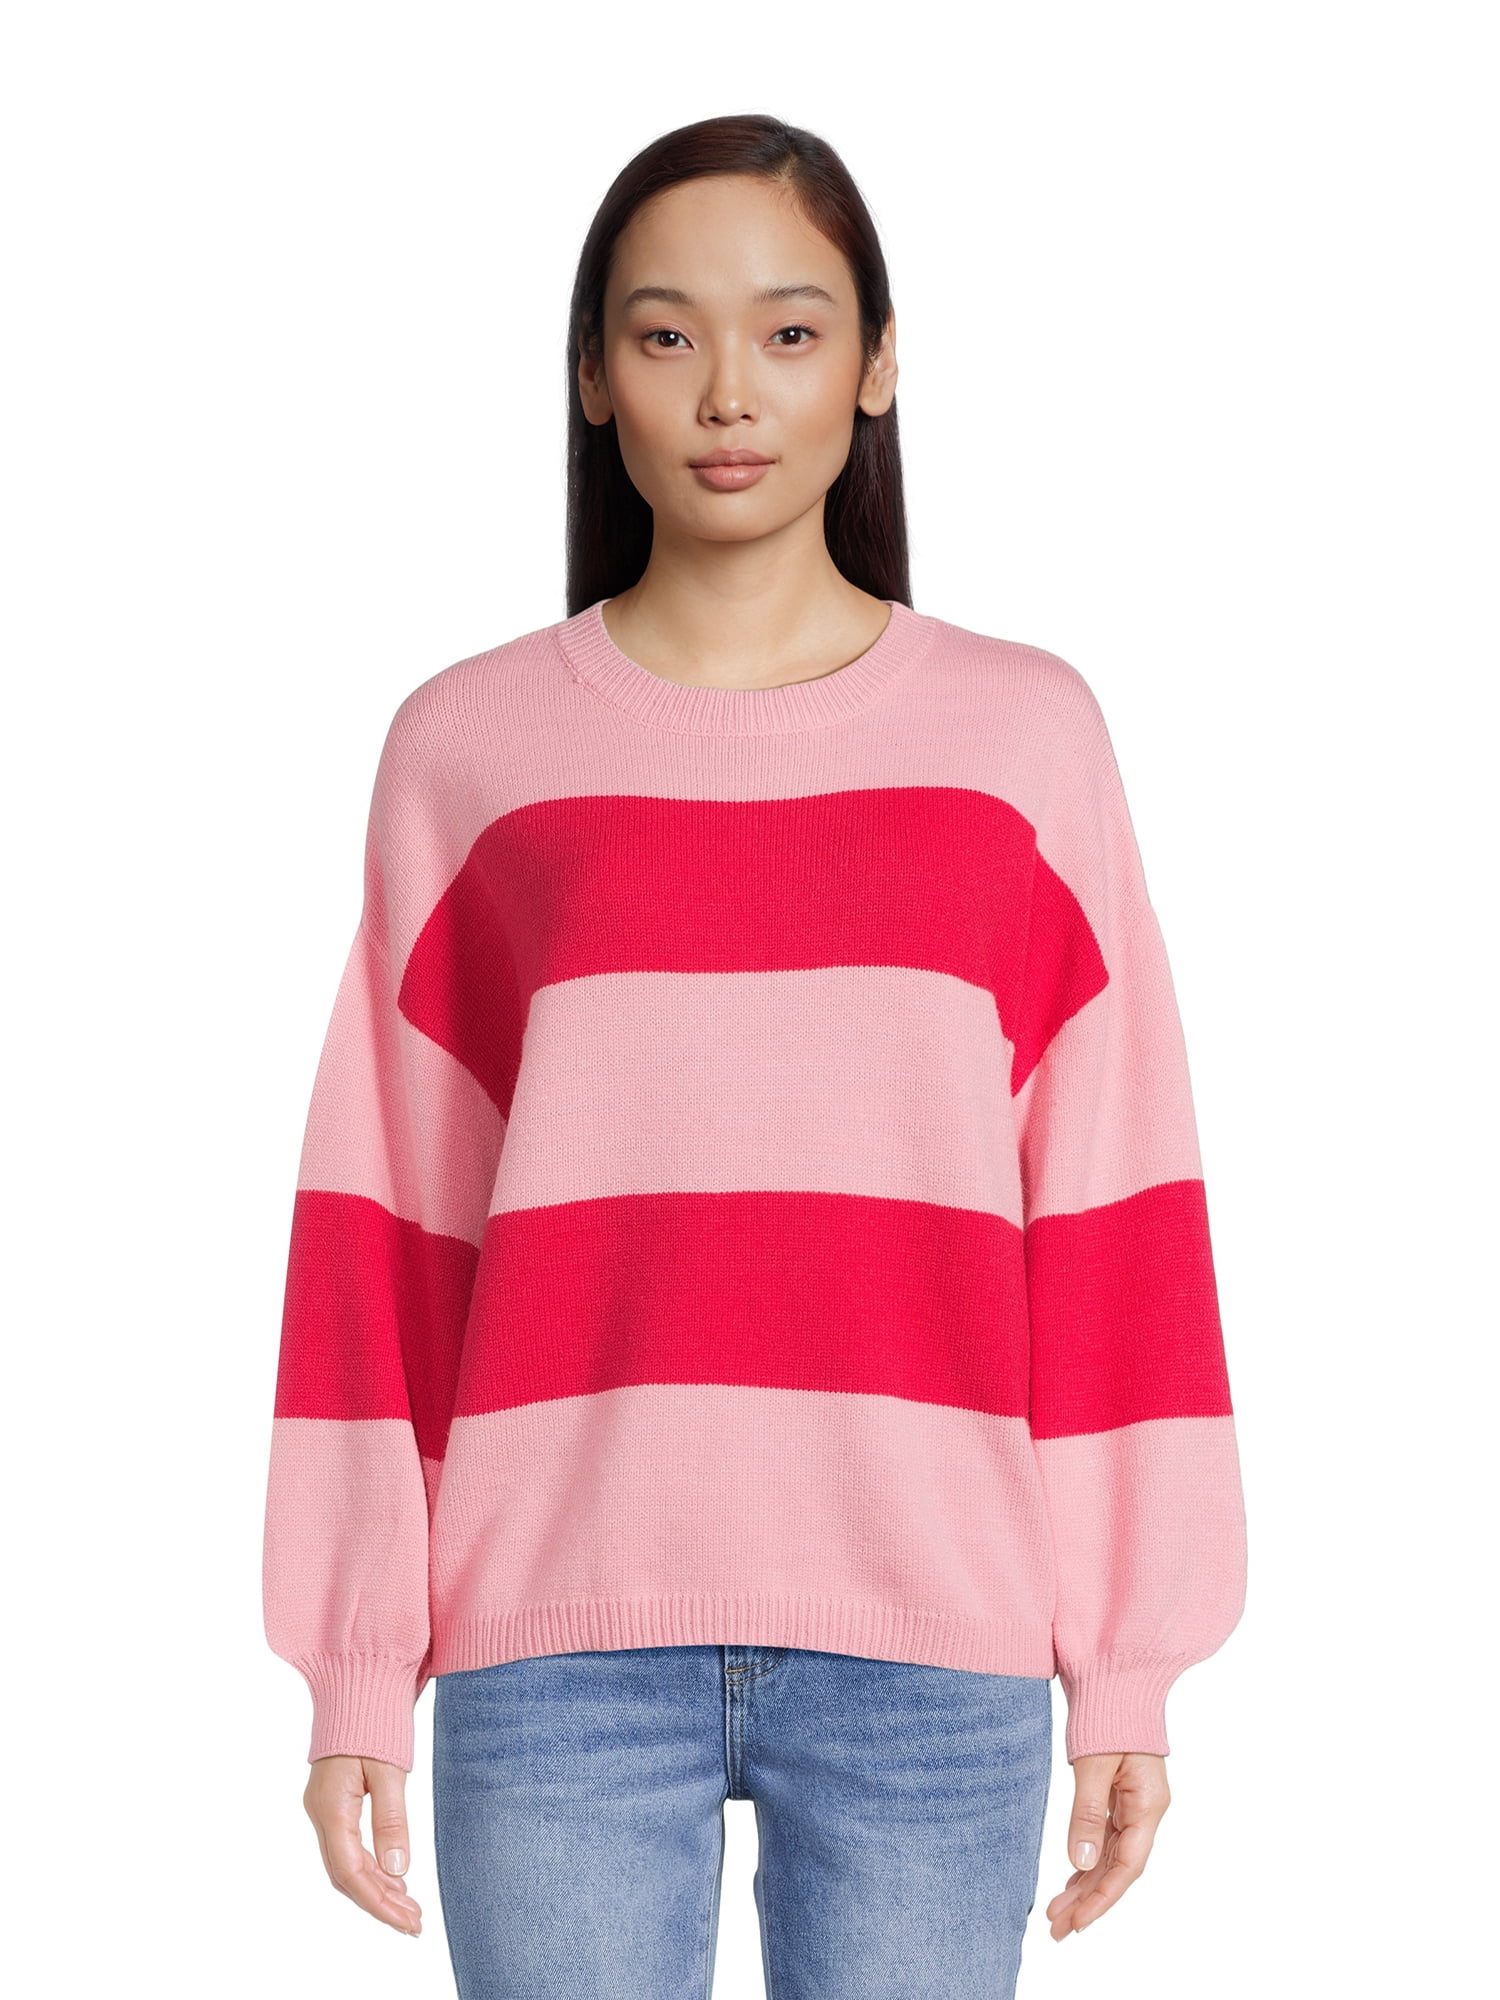 Dreamers By Debut Women's Striped Sweater with Long Puff Sleeves, Mid ...